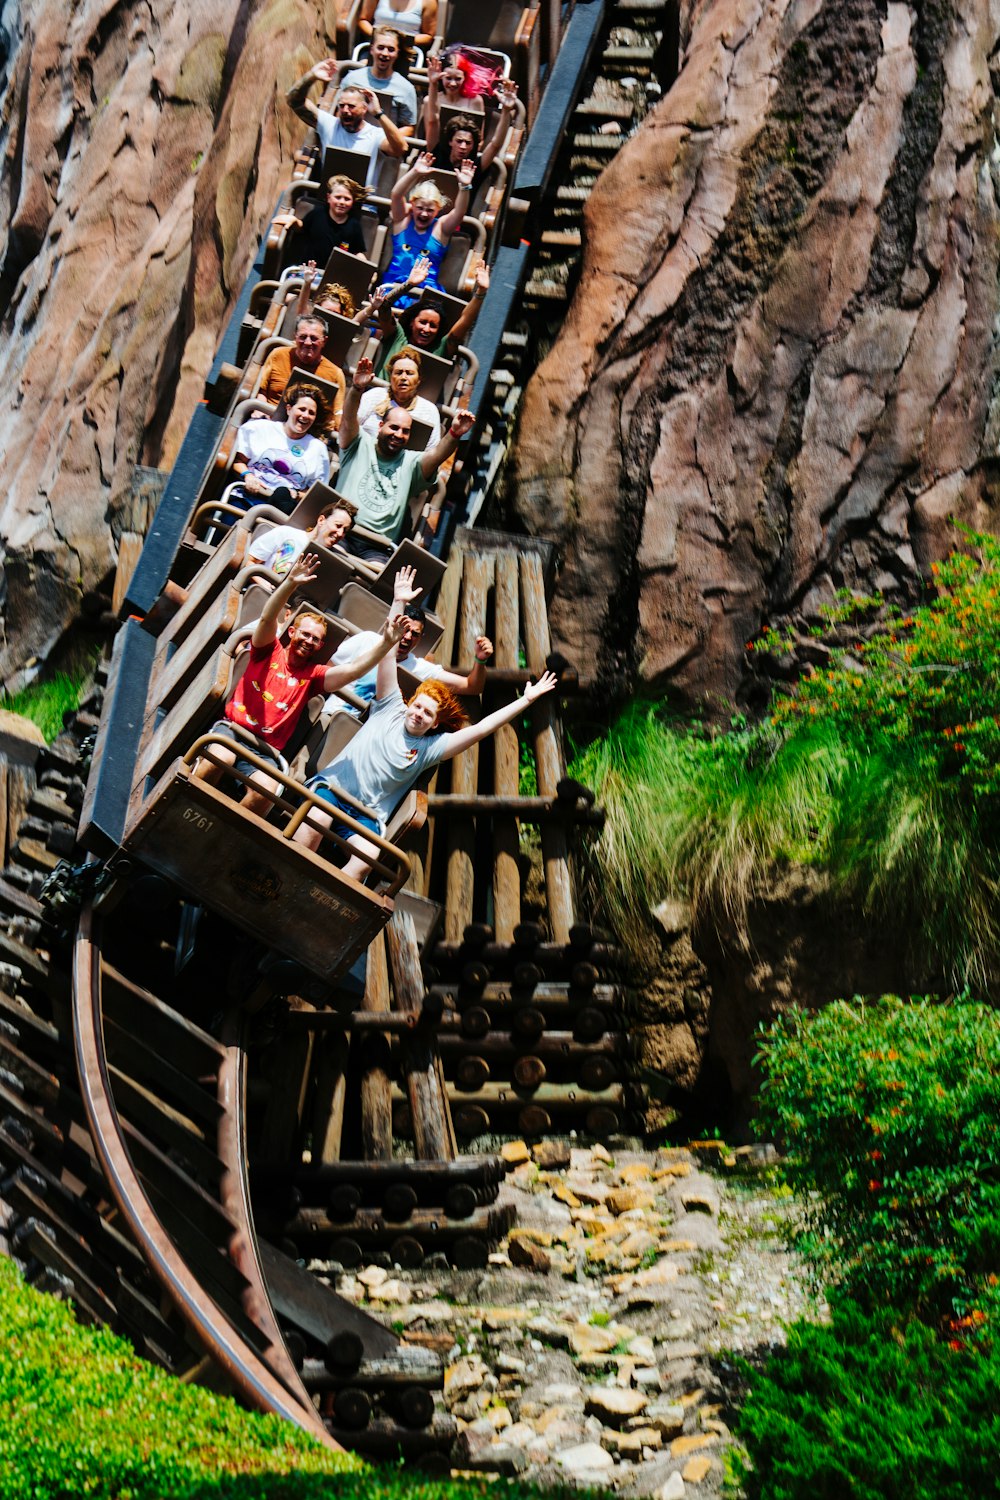 a group of people riding on a roller coaster